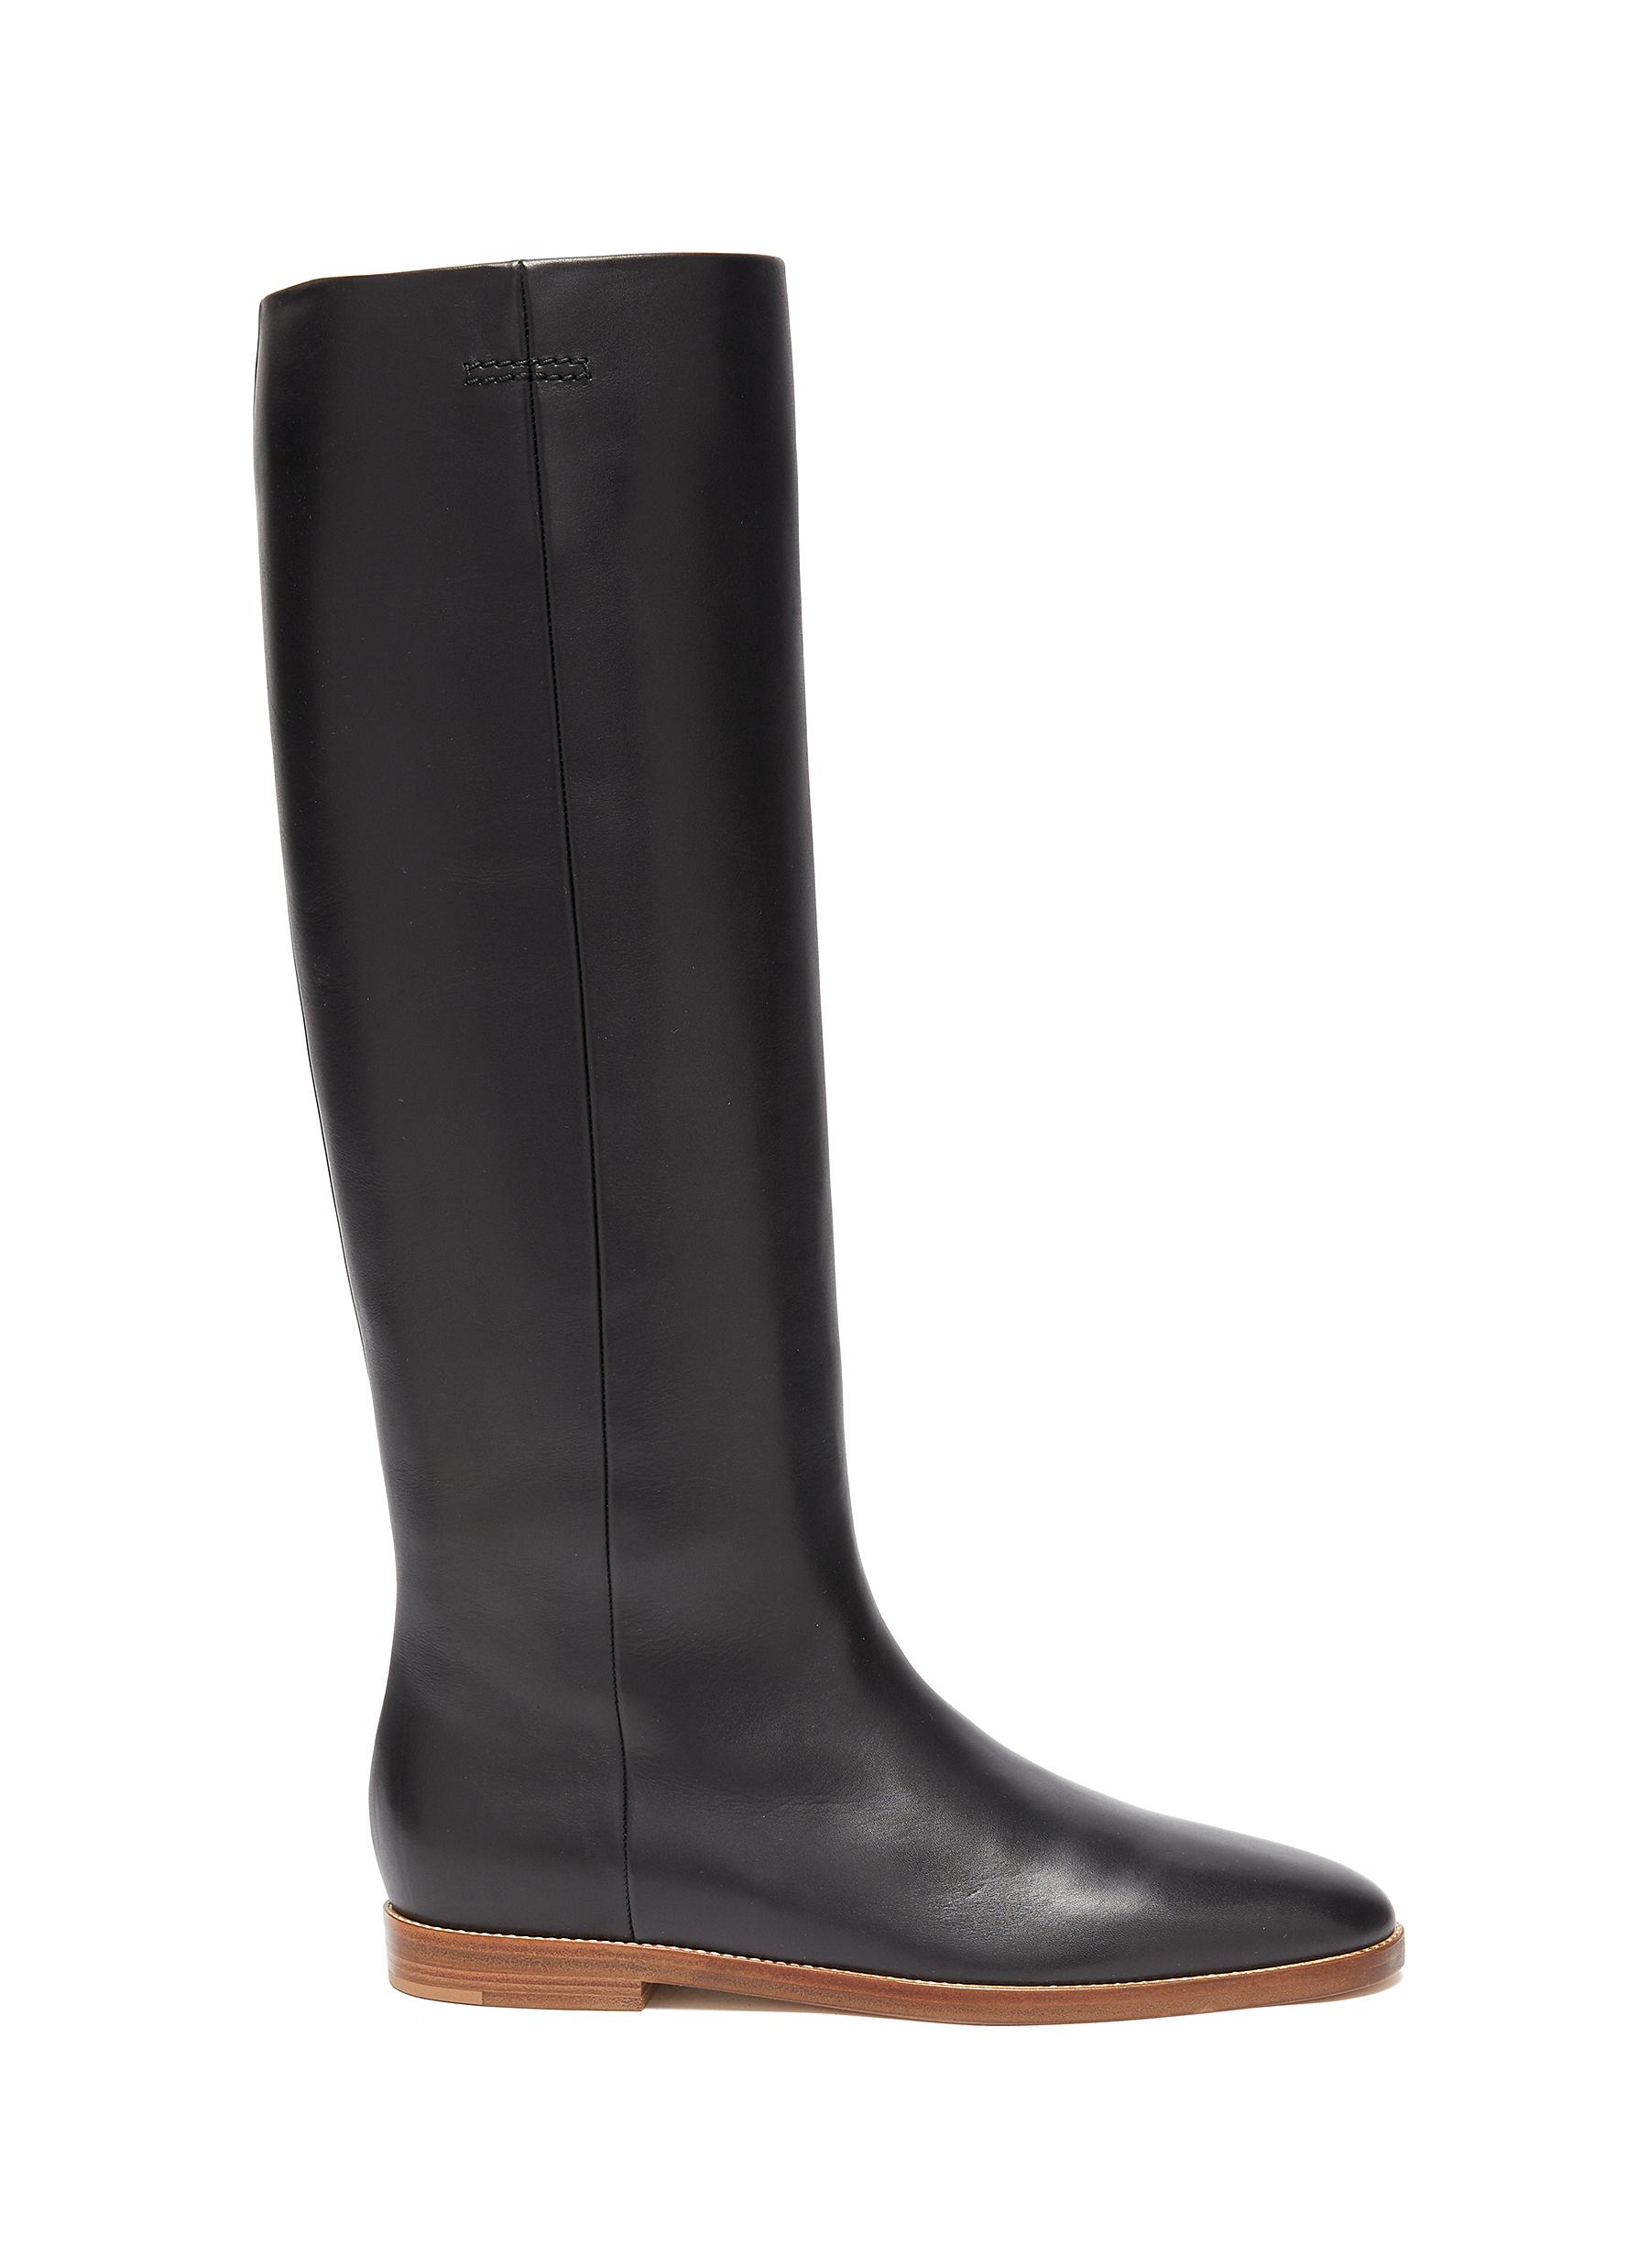 Gabriela Hearst SKYE' LEATHER RIDING BOOTS